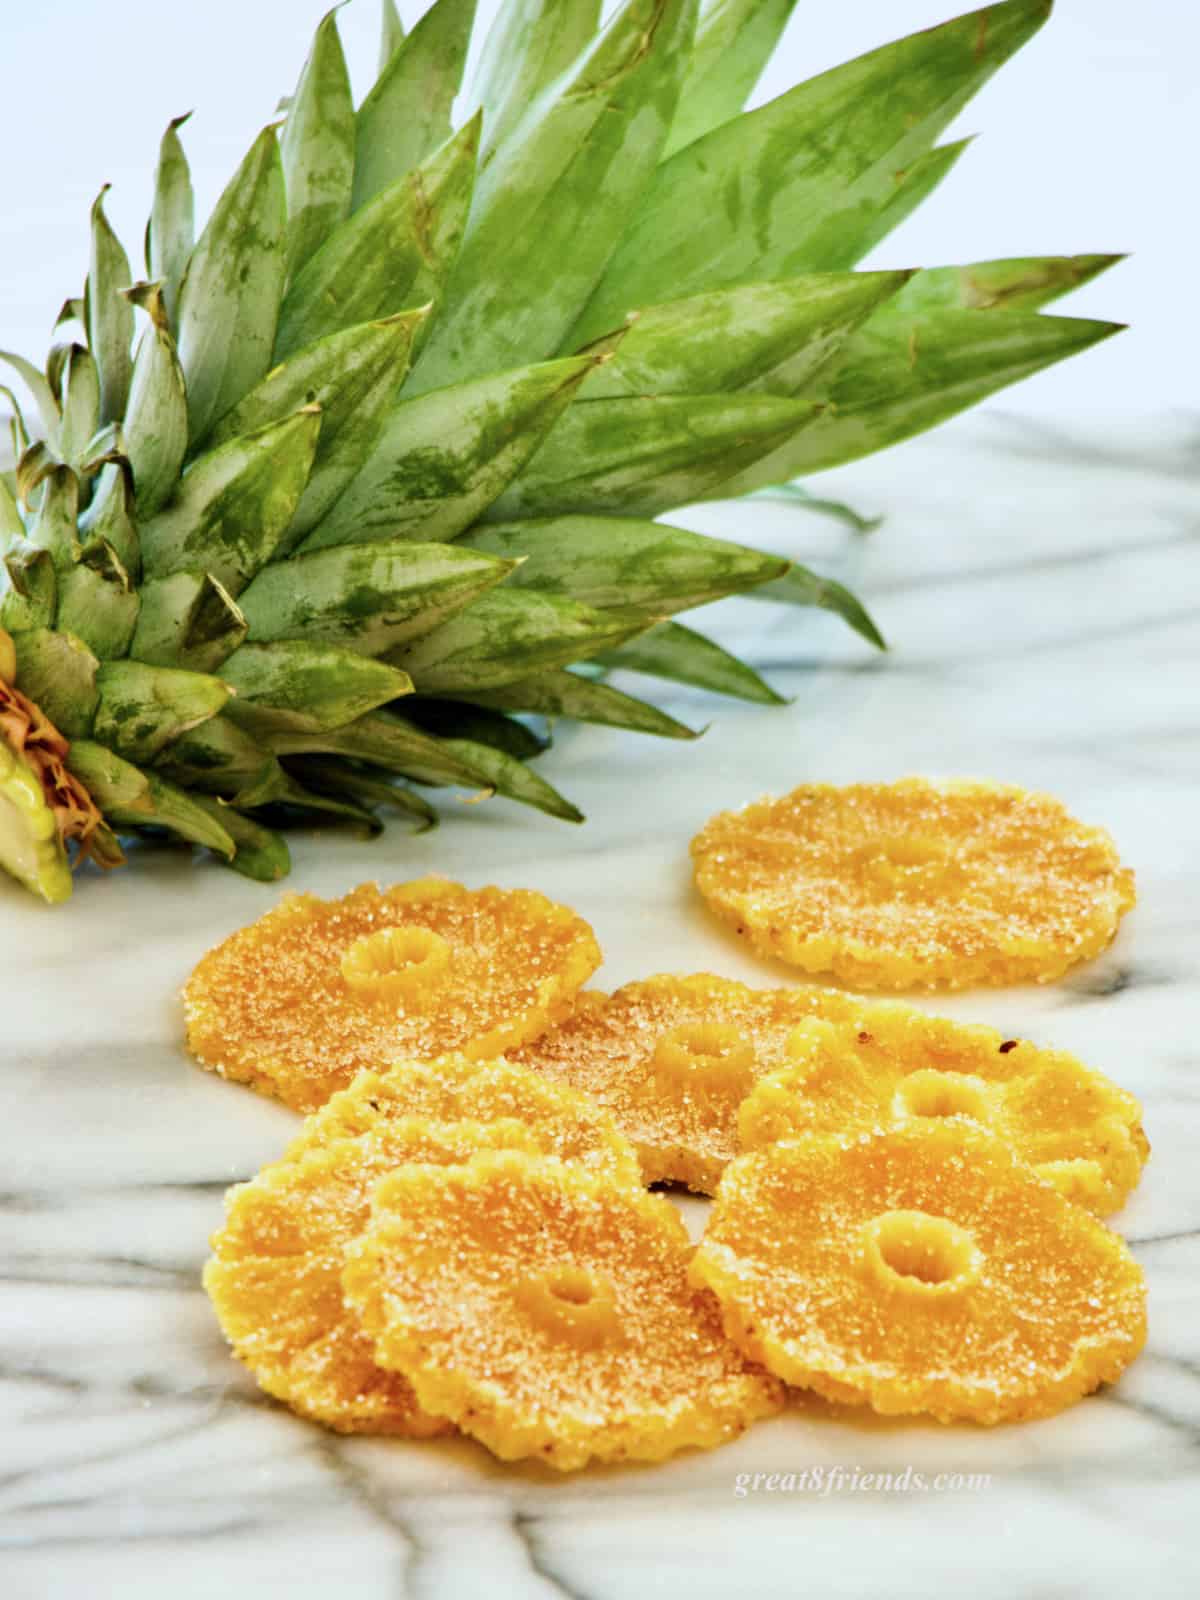 Candied pineapple slices laying on marble.